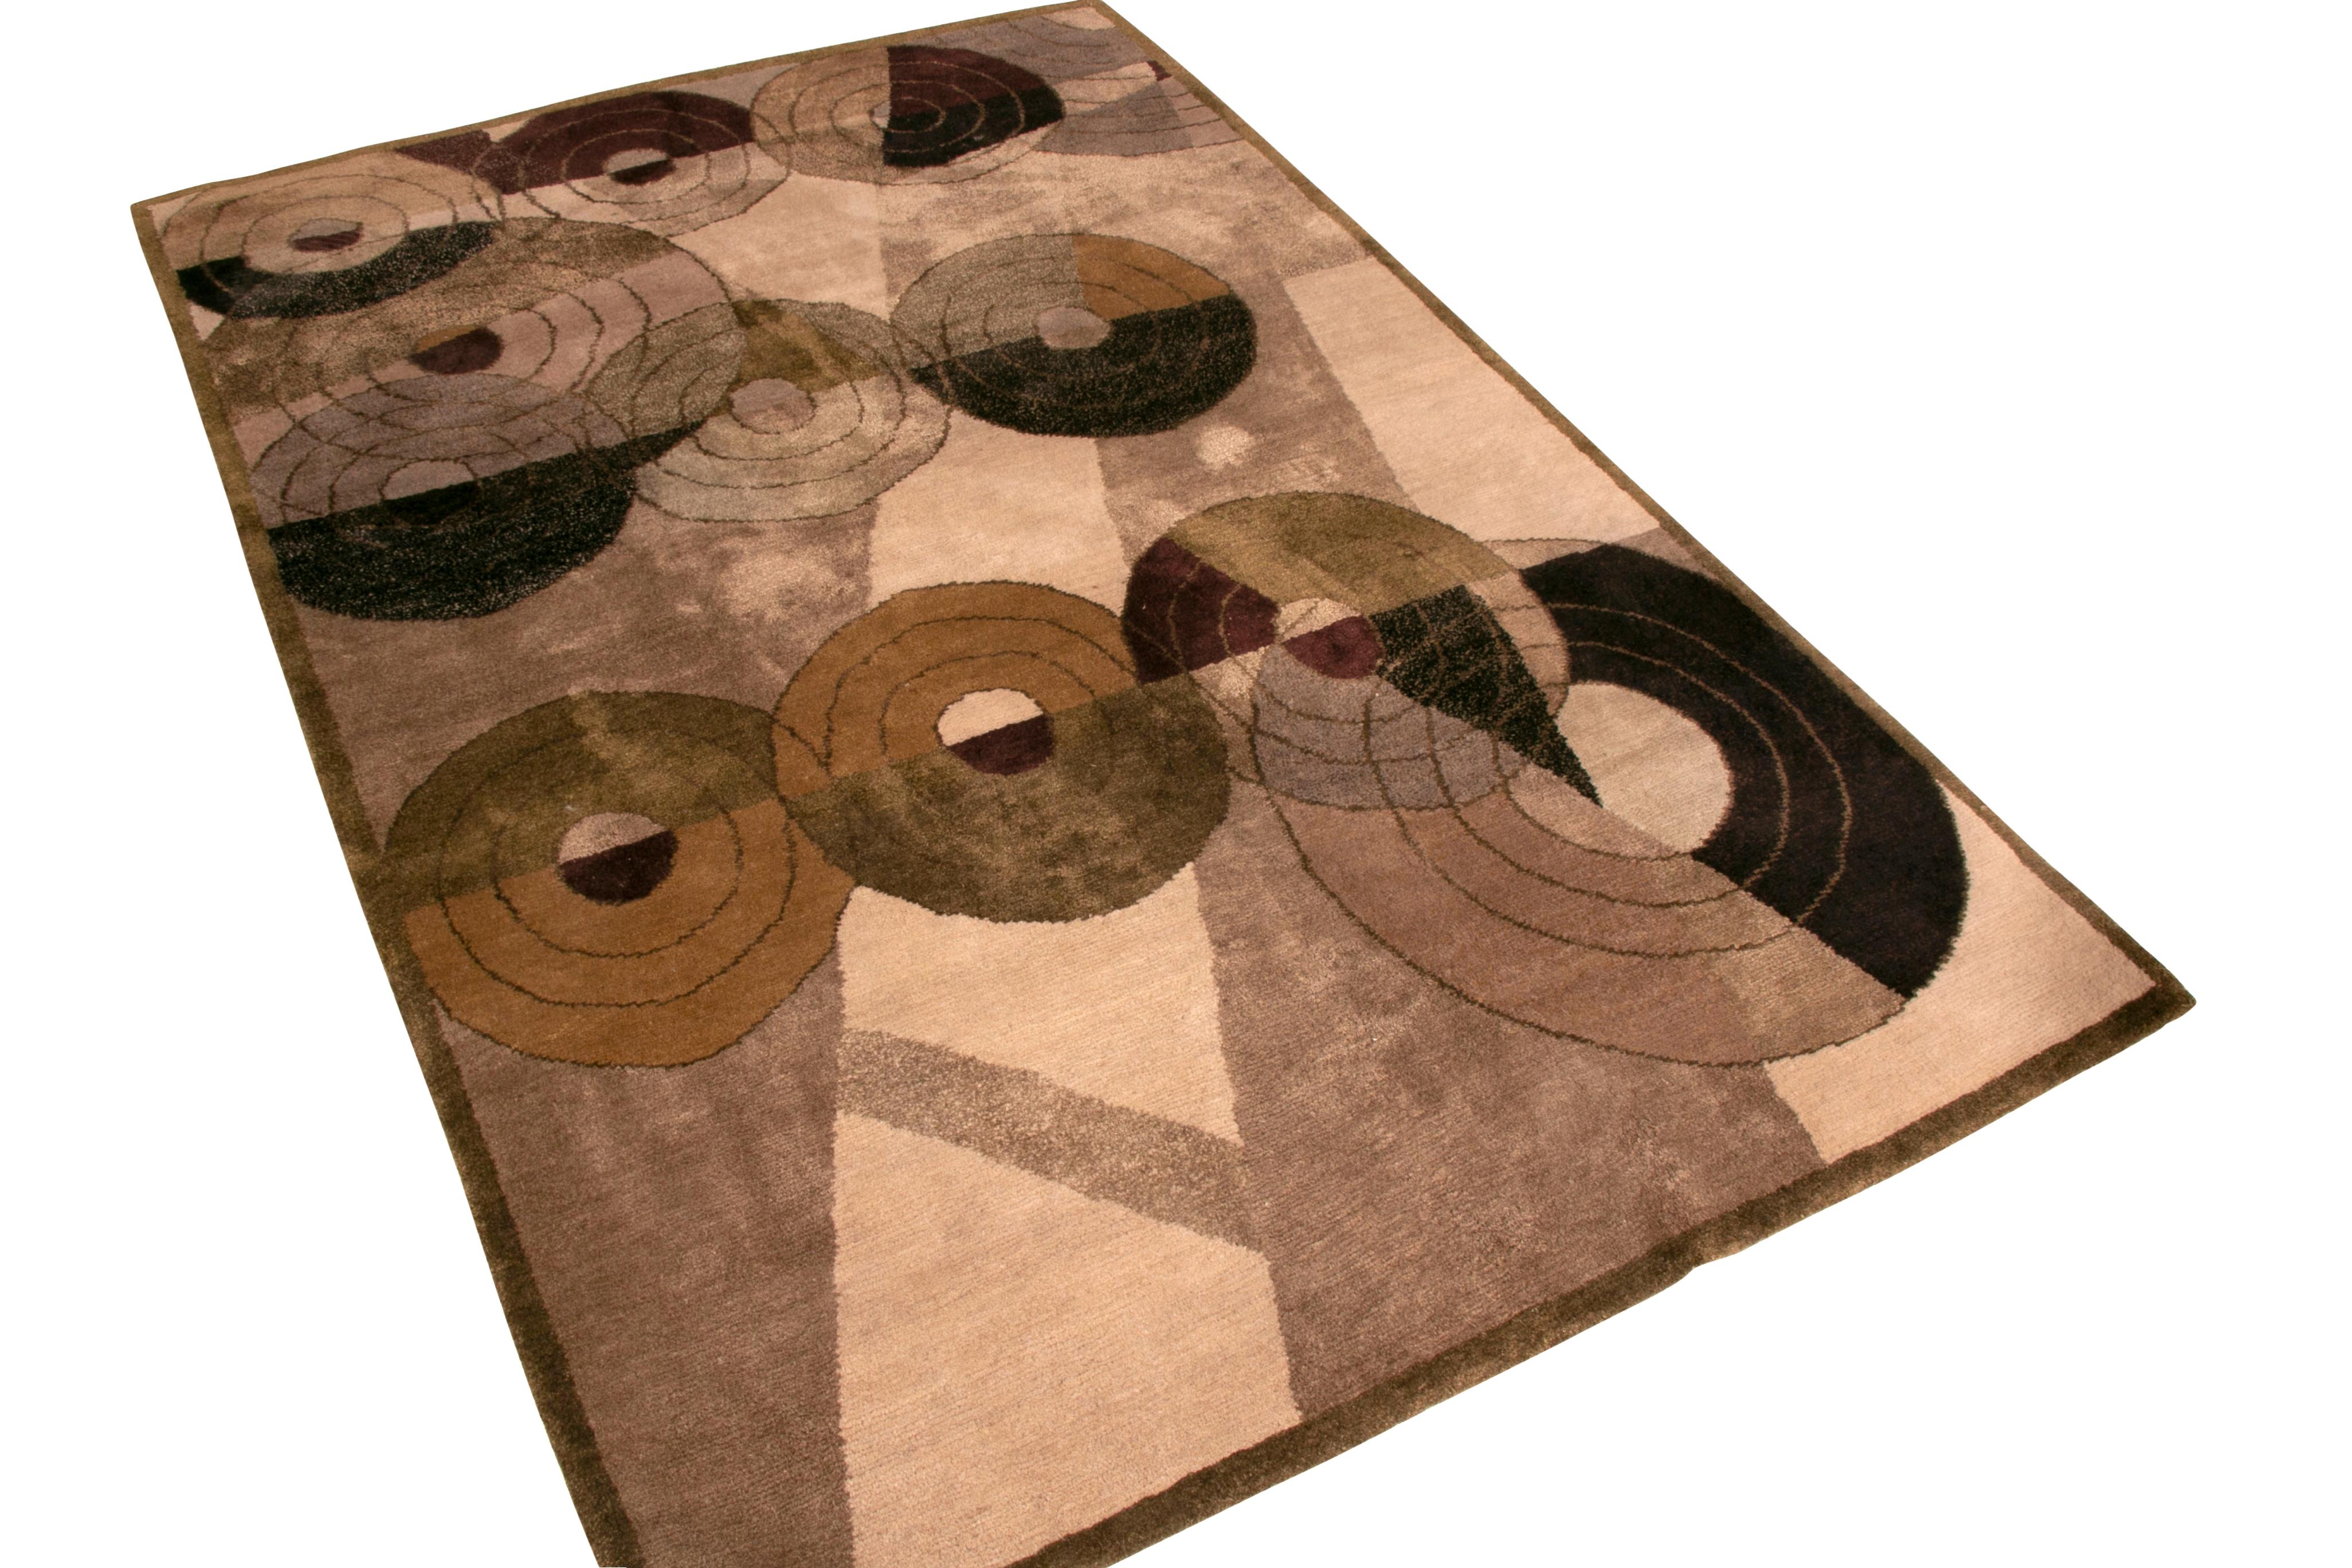 Dubbed “Legrain” in homage to the inspirational work of French designer Pierre Legrain, this 4x6 Art Deco rug joins the latest additions to the New & Modern Collection by Rug & Kilim; remarkable among the classic inspirations with modern appeal akin